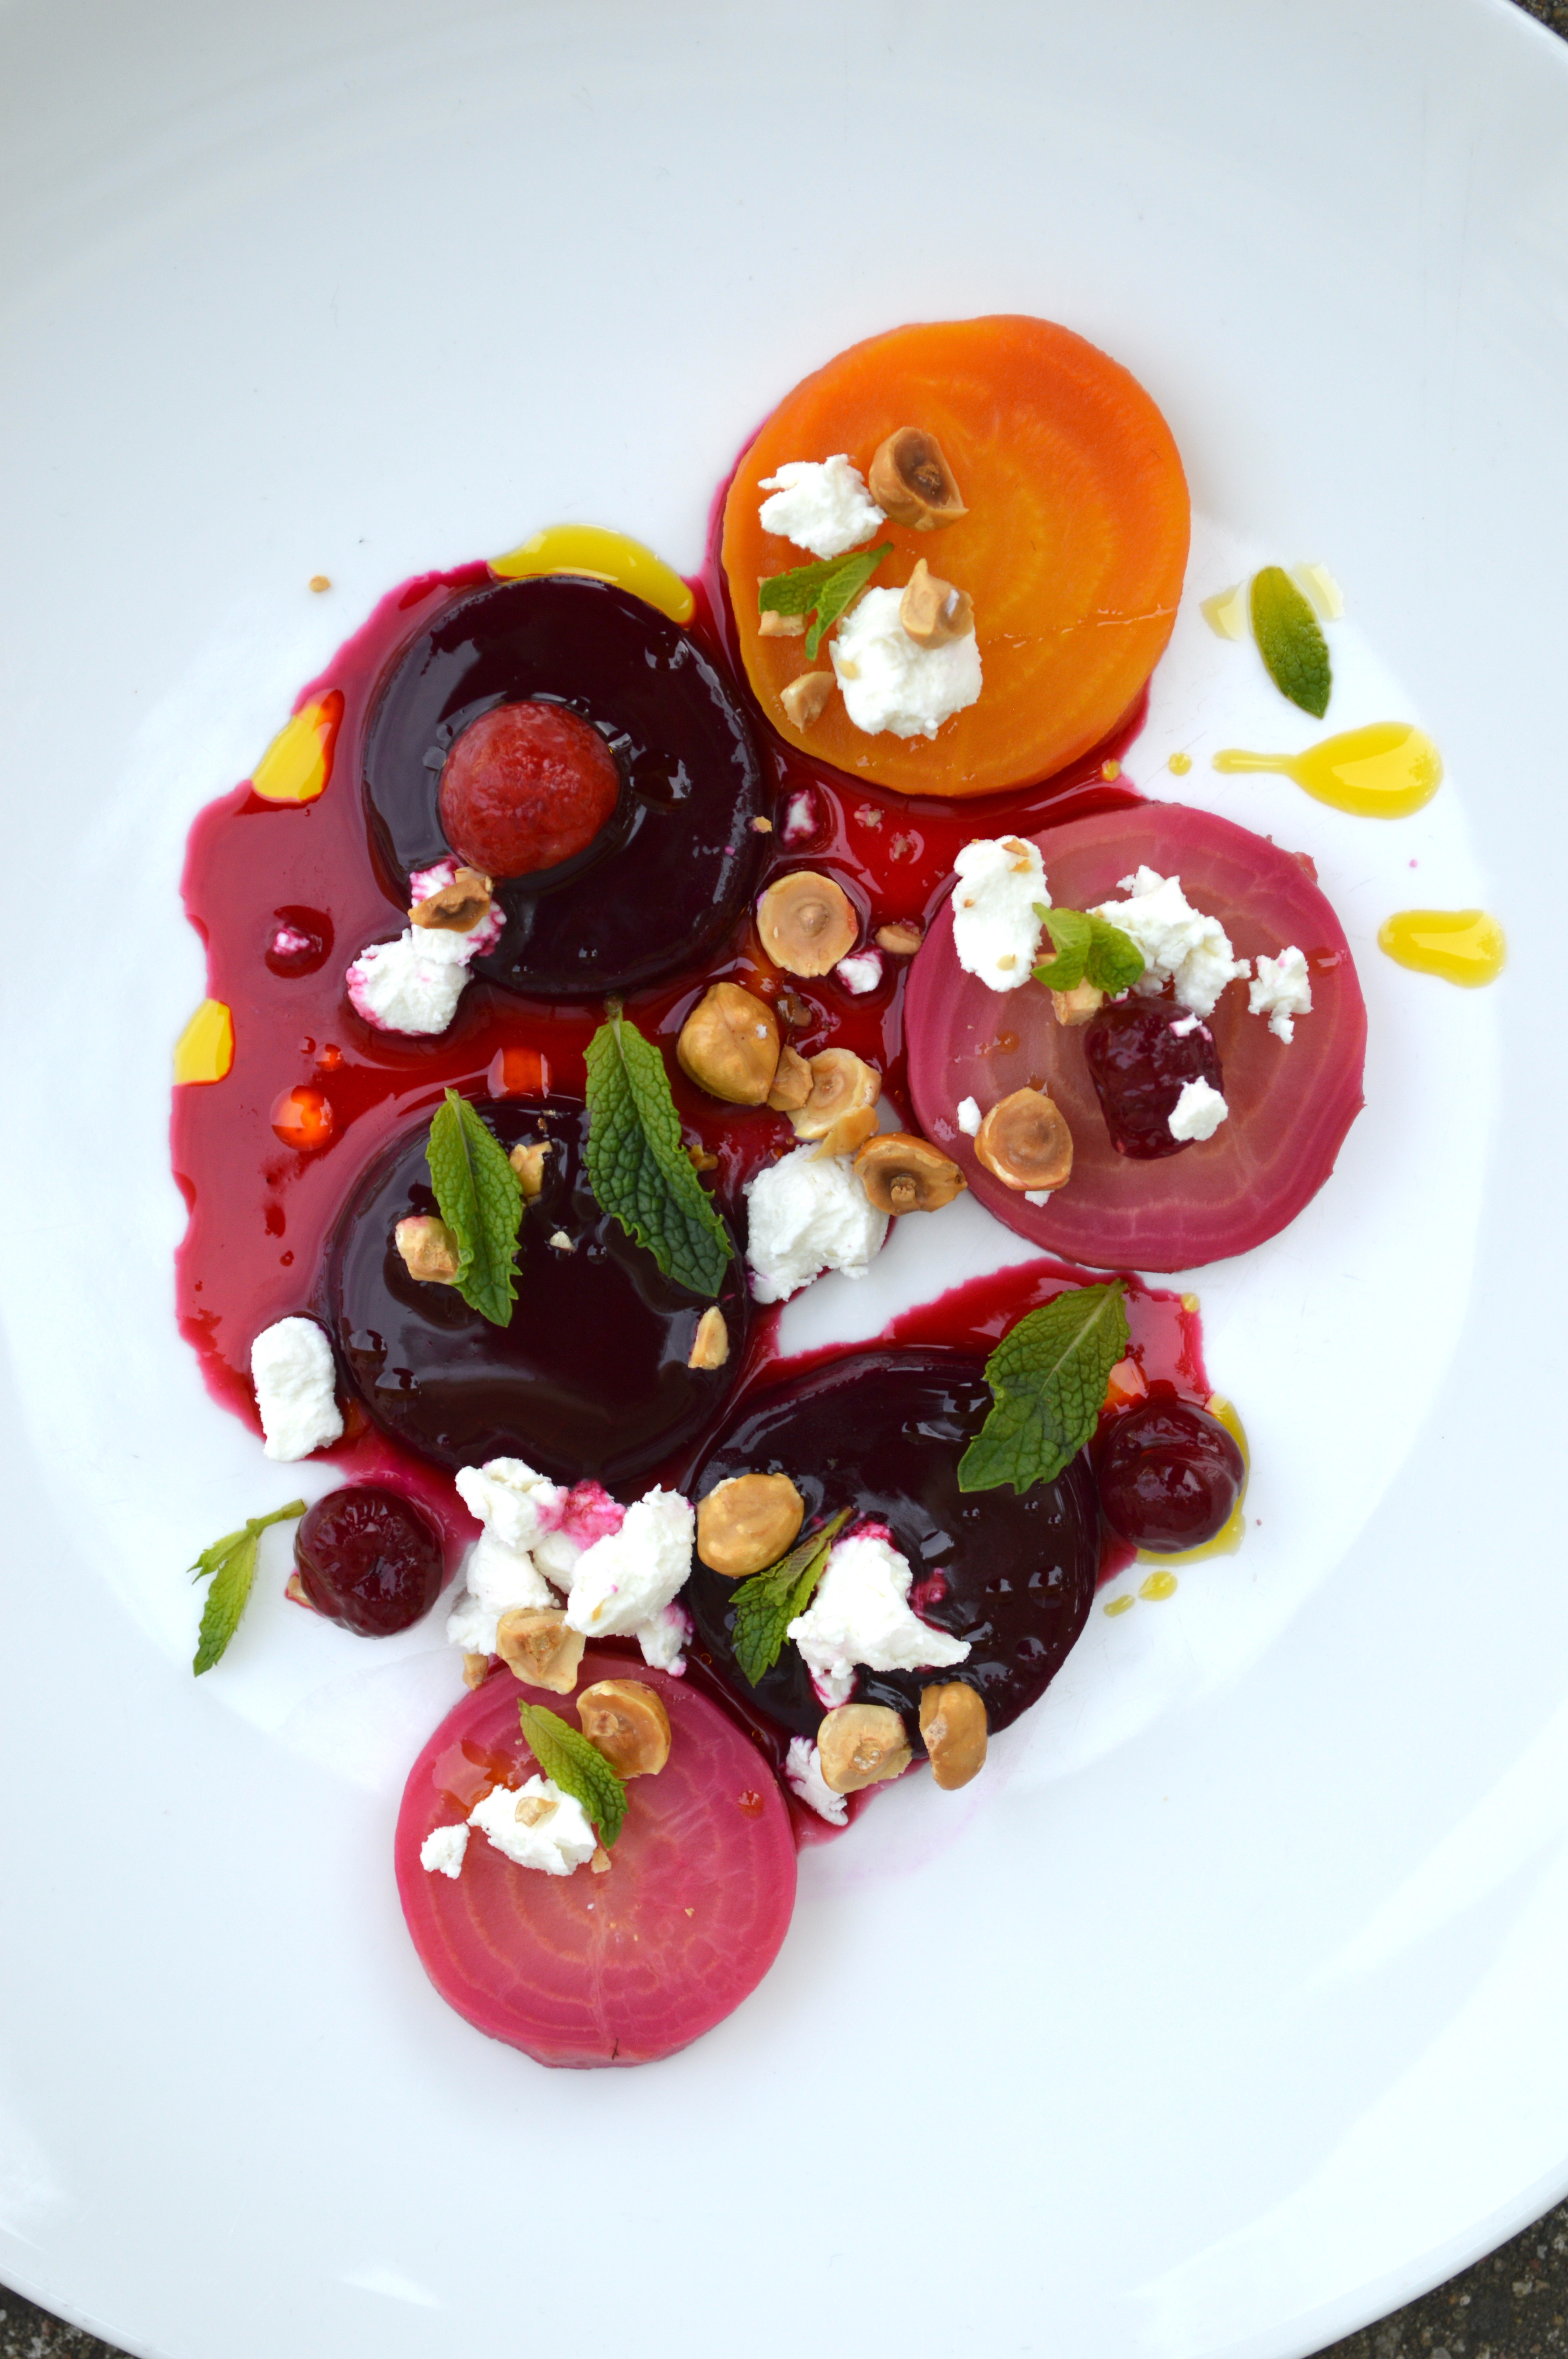 A colourful beet salad with goat cheese, mint, cherries, and hazelnuts.